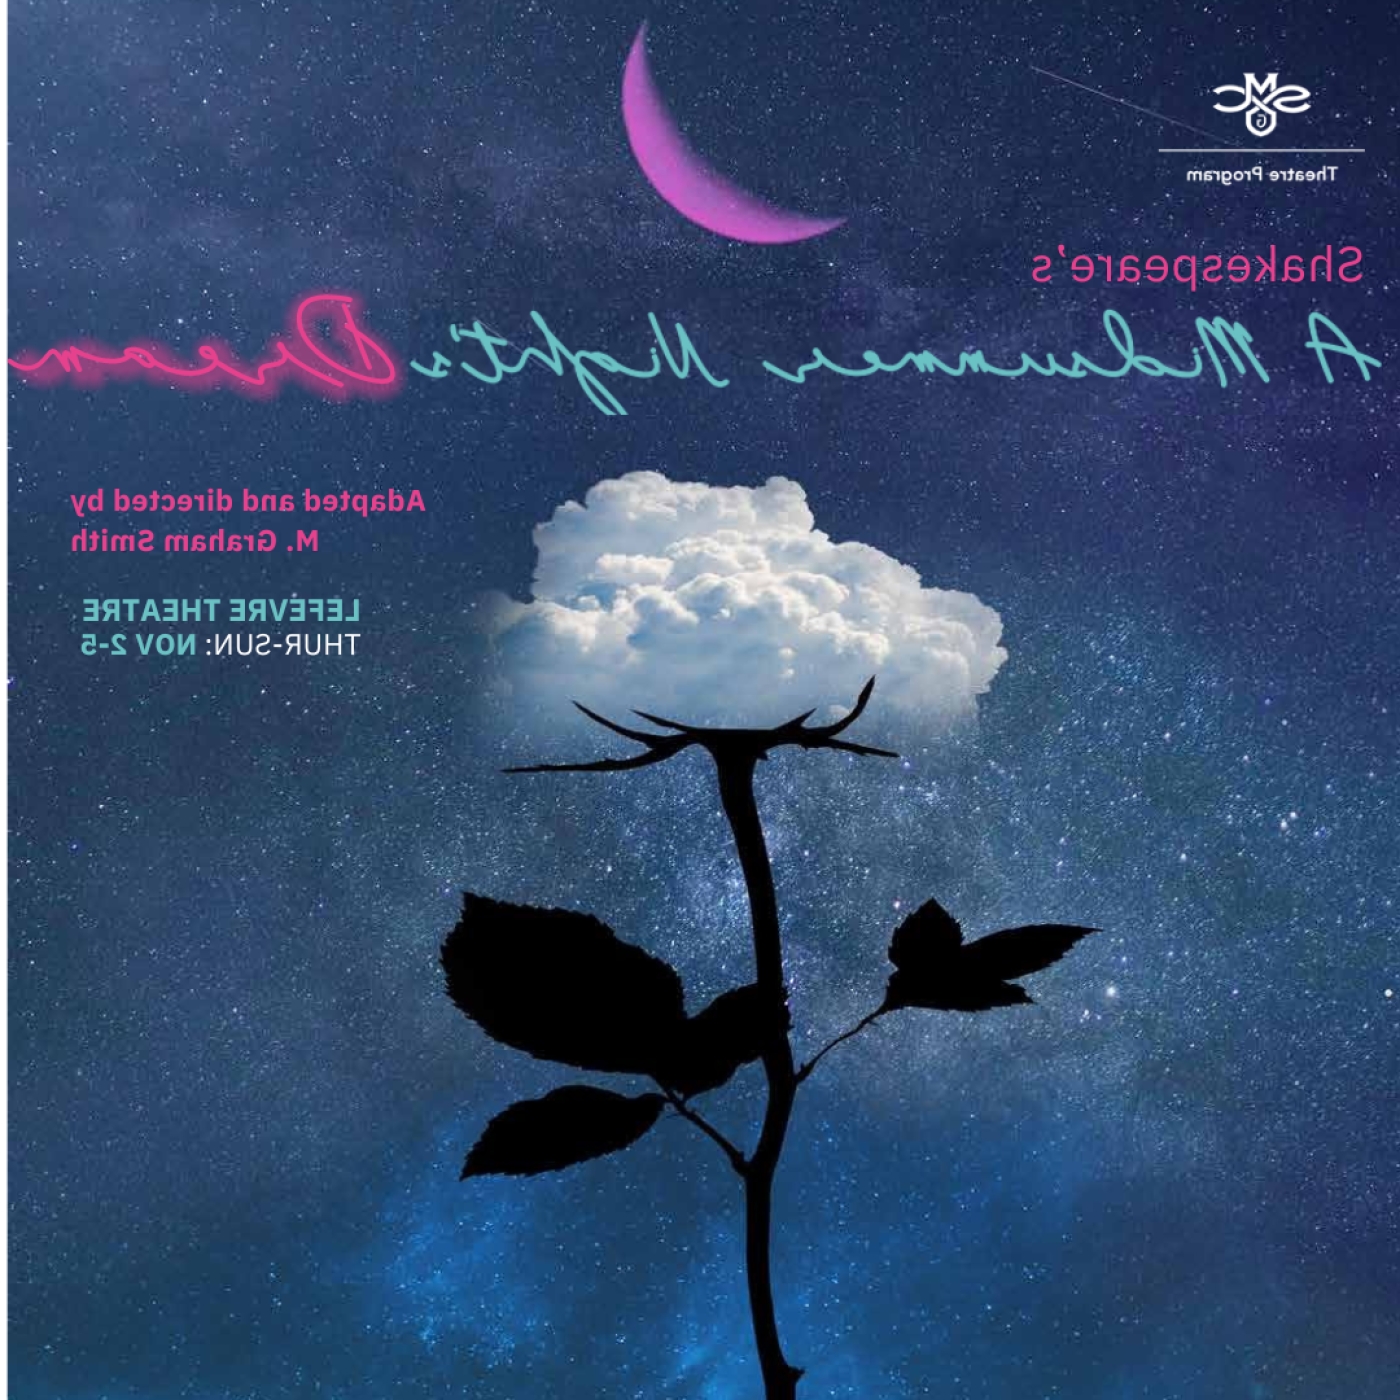 A white rose against a dark blue sky with "A Midsummer Night's Dream" adapted and directted by M. 格雷厄姆·史密斯在LeFevre剧院11月. 2-5